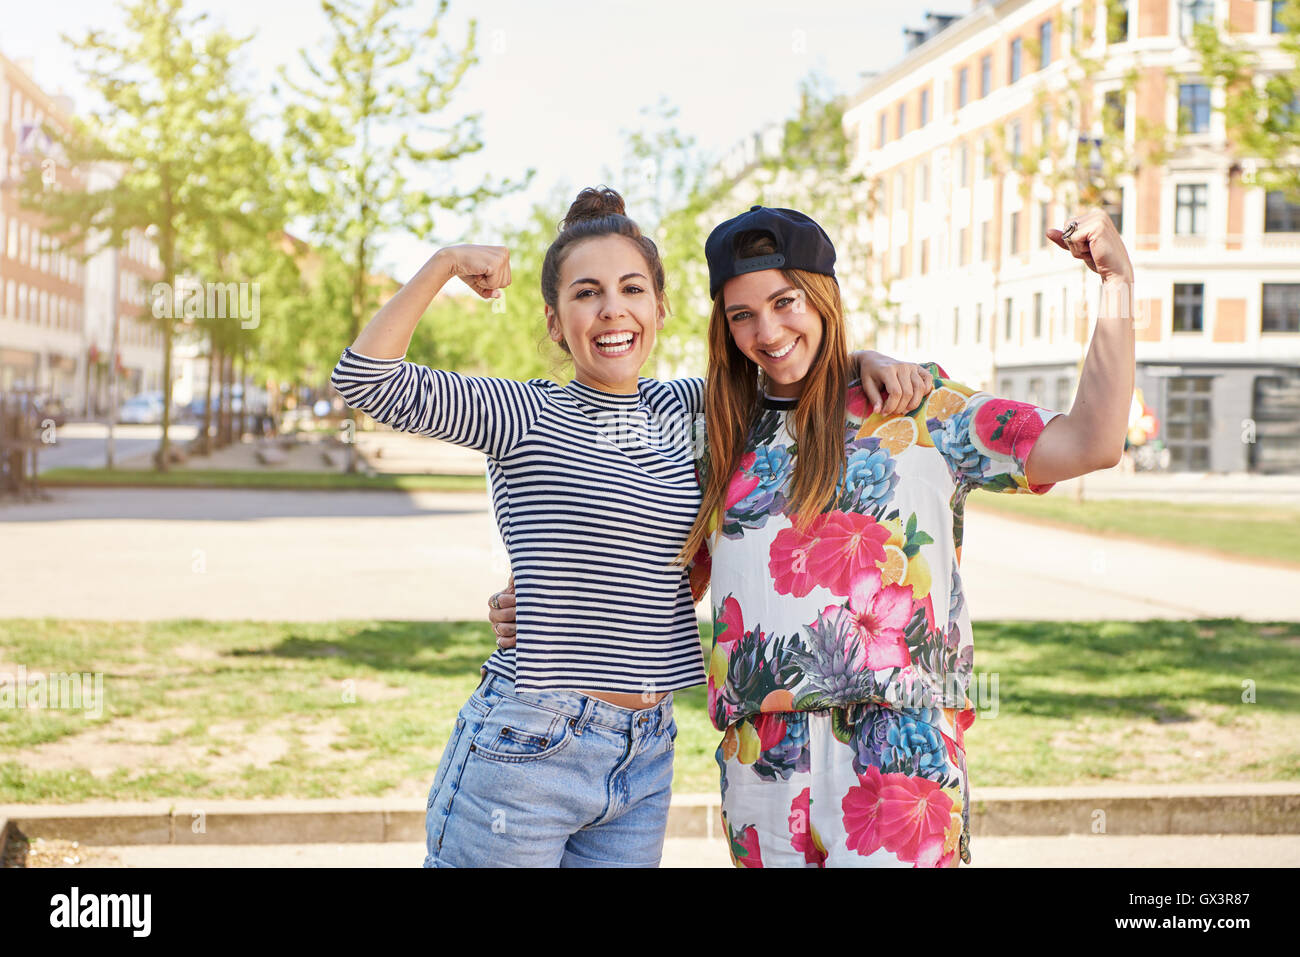 Cute vivacious young women friends standing arm in arm on a hot summer day in an urban street waving at the camera Stock Photo